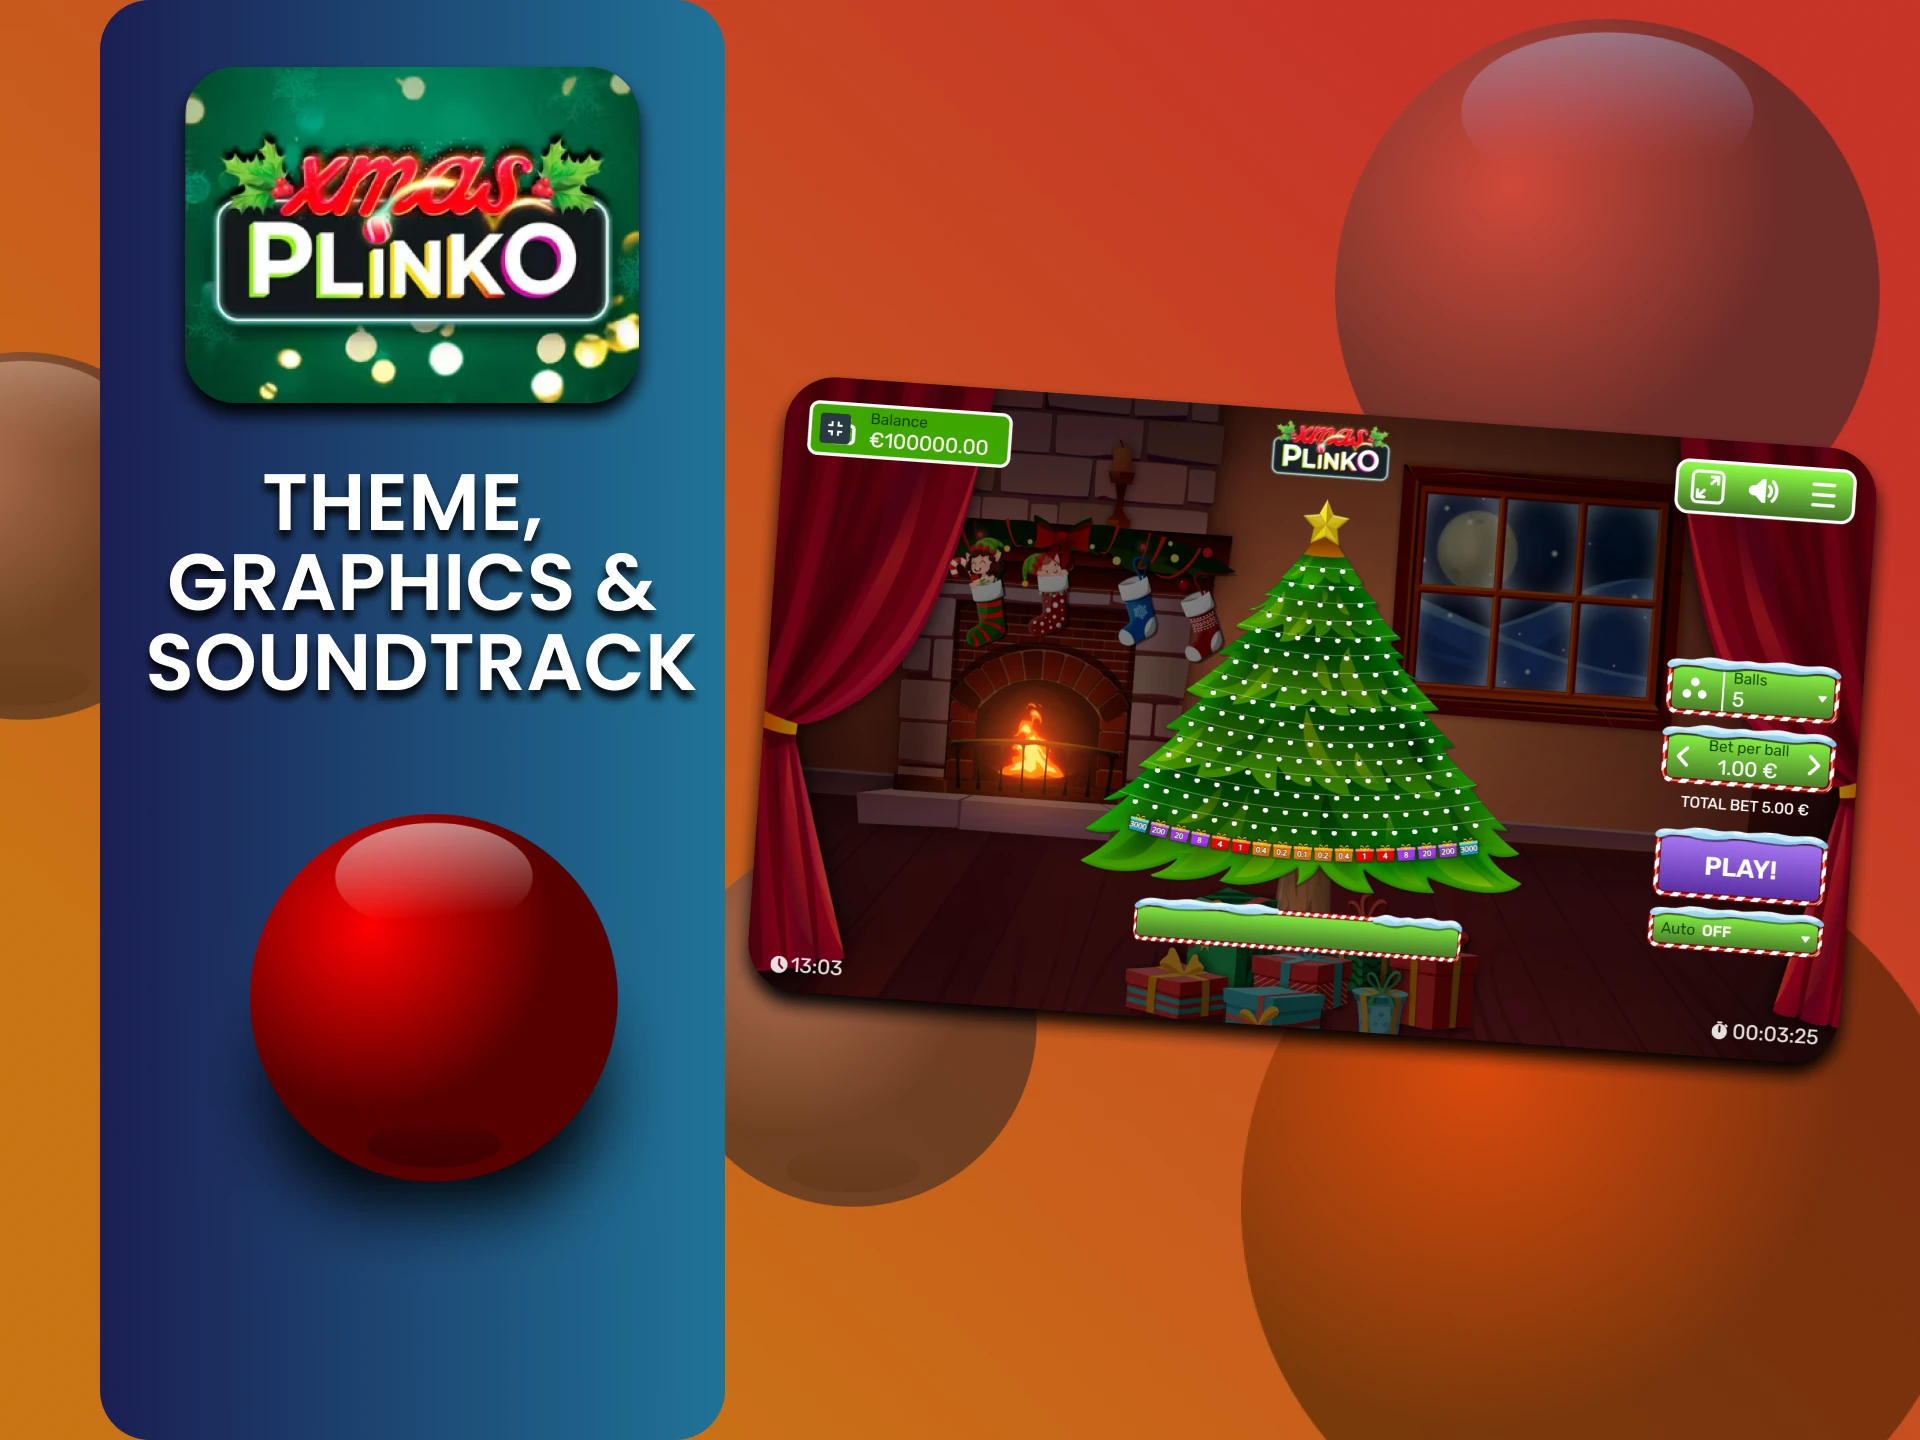 We will talk about the visual part of the Plinko Xmas game.